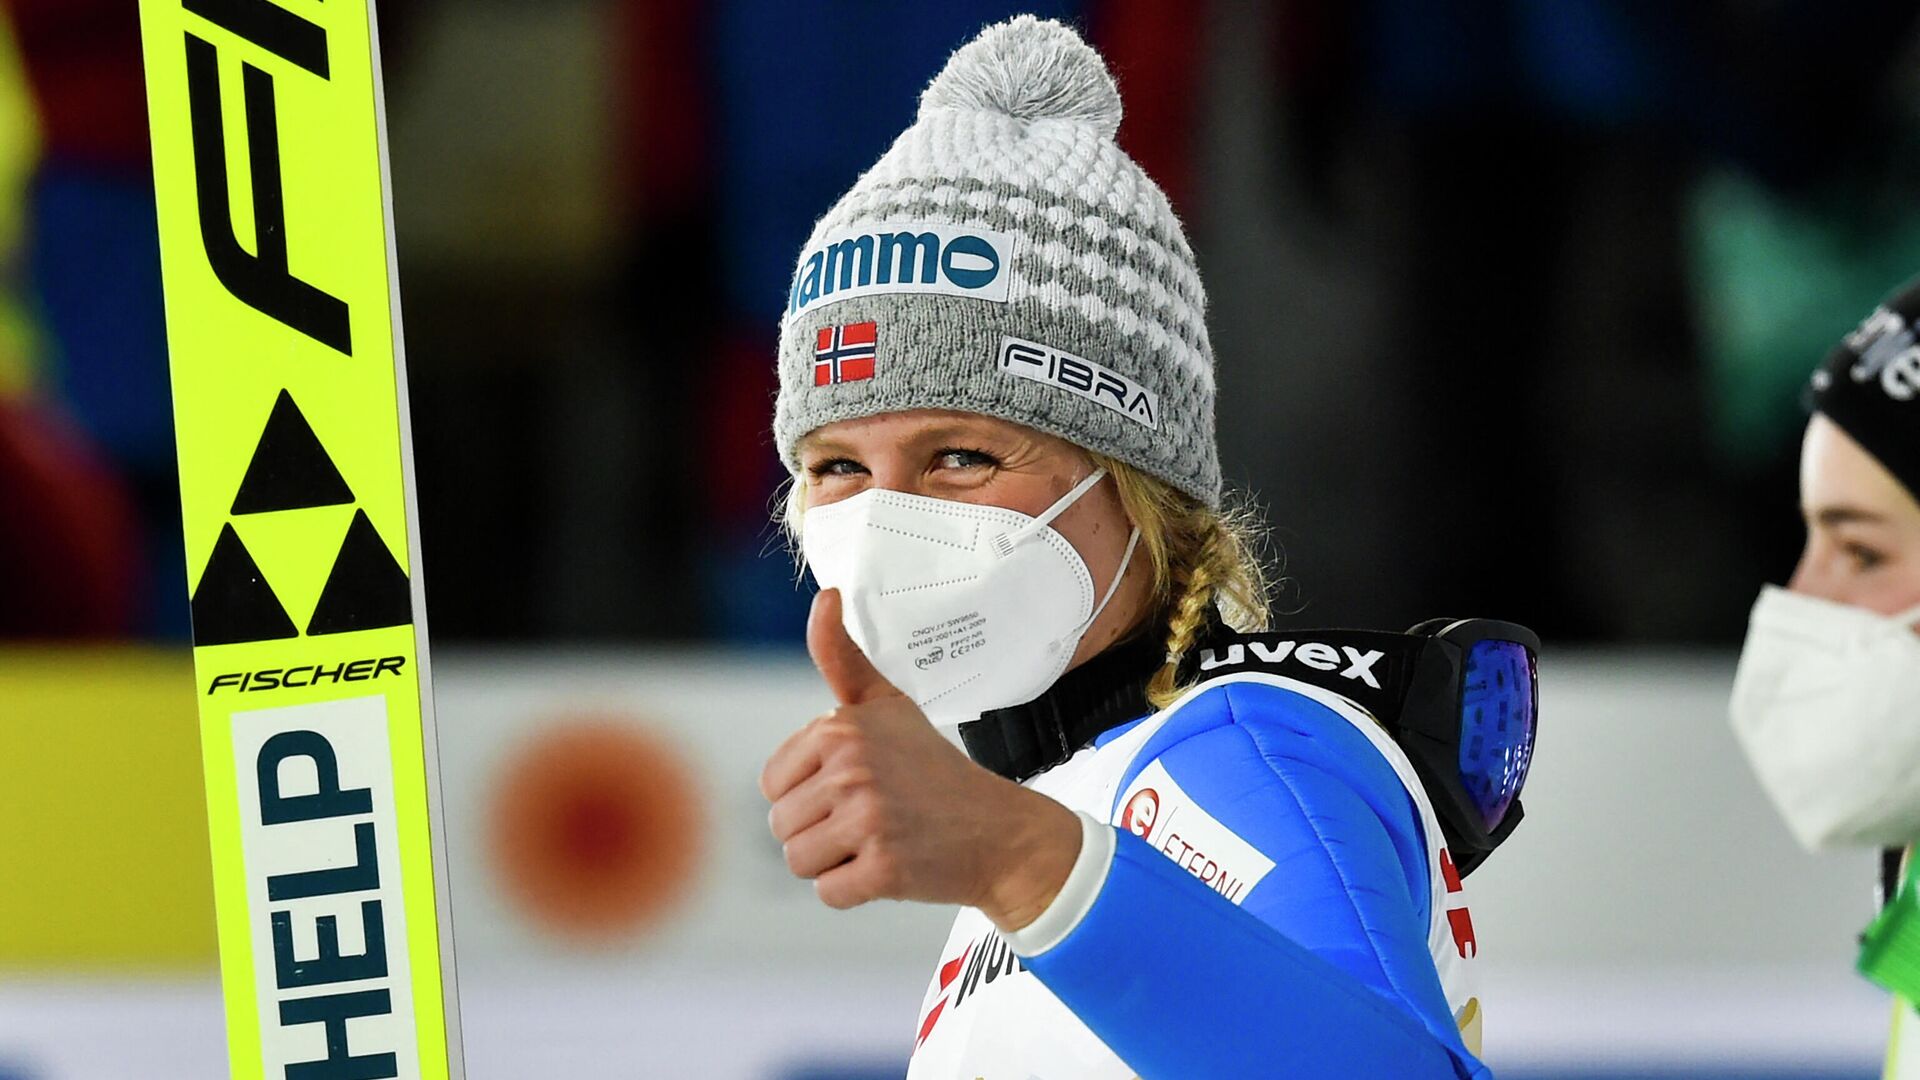 Norway's Maren Lundby give a thumbs up after winning the women's HS137 large hill jumping event at the FIS Nordic Ski World Championships in Oberstdorf, southern Germany, on March 3, 2021. (Photo by Christof Stache / AFP) - РИА Новости, 1920, 03.03.2021